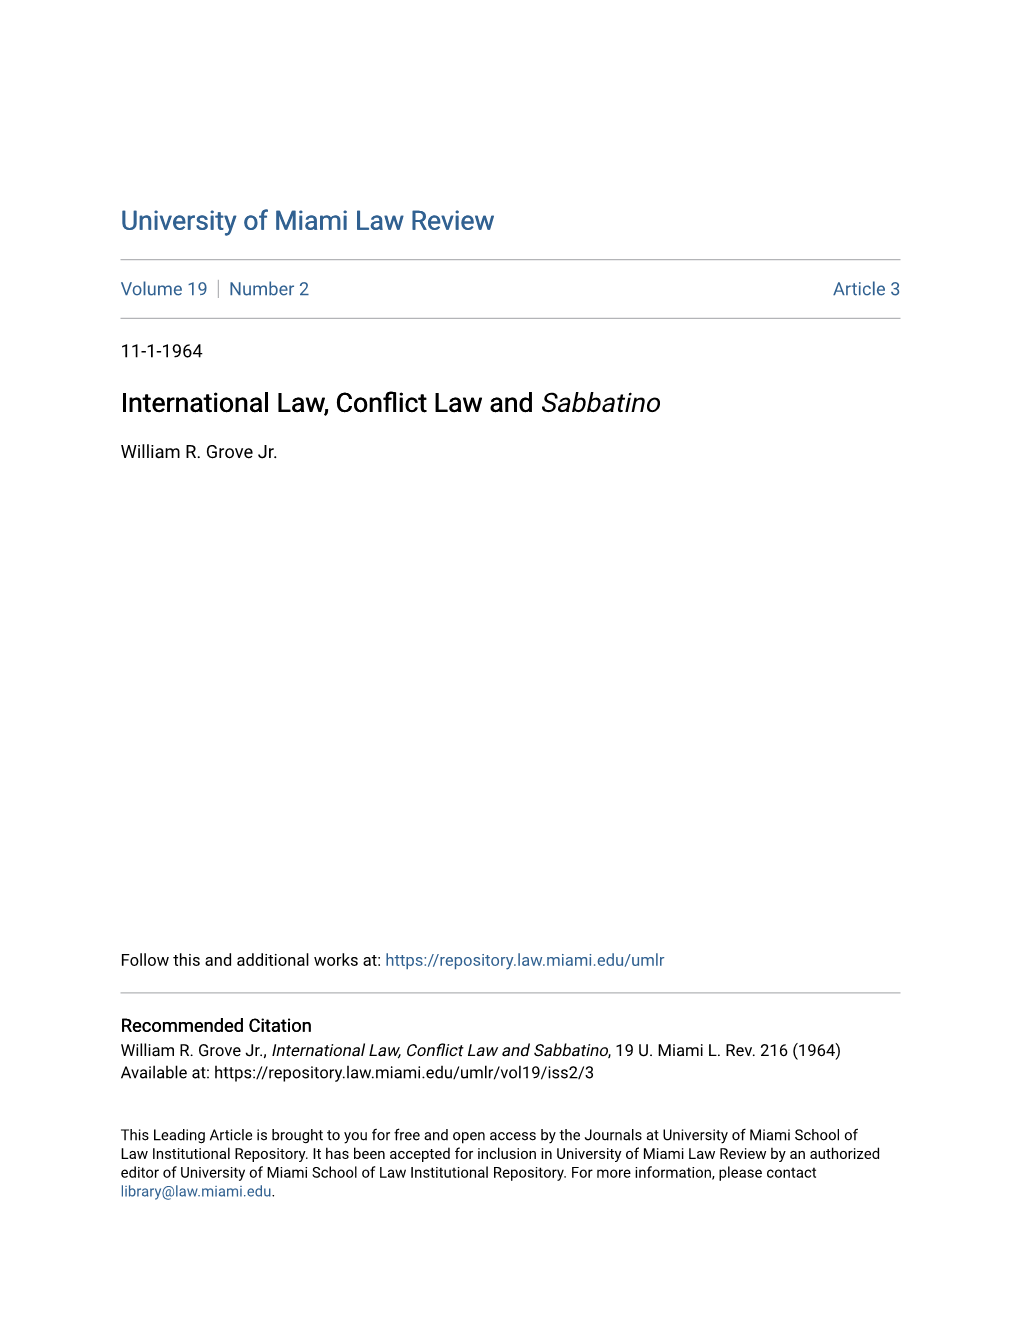 International Law, Conflict Law and Sabbatino